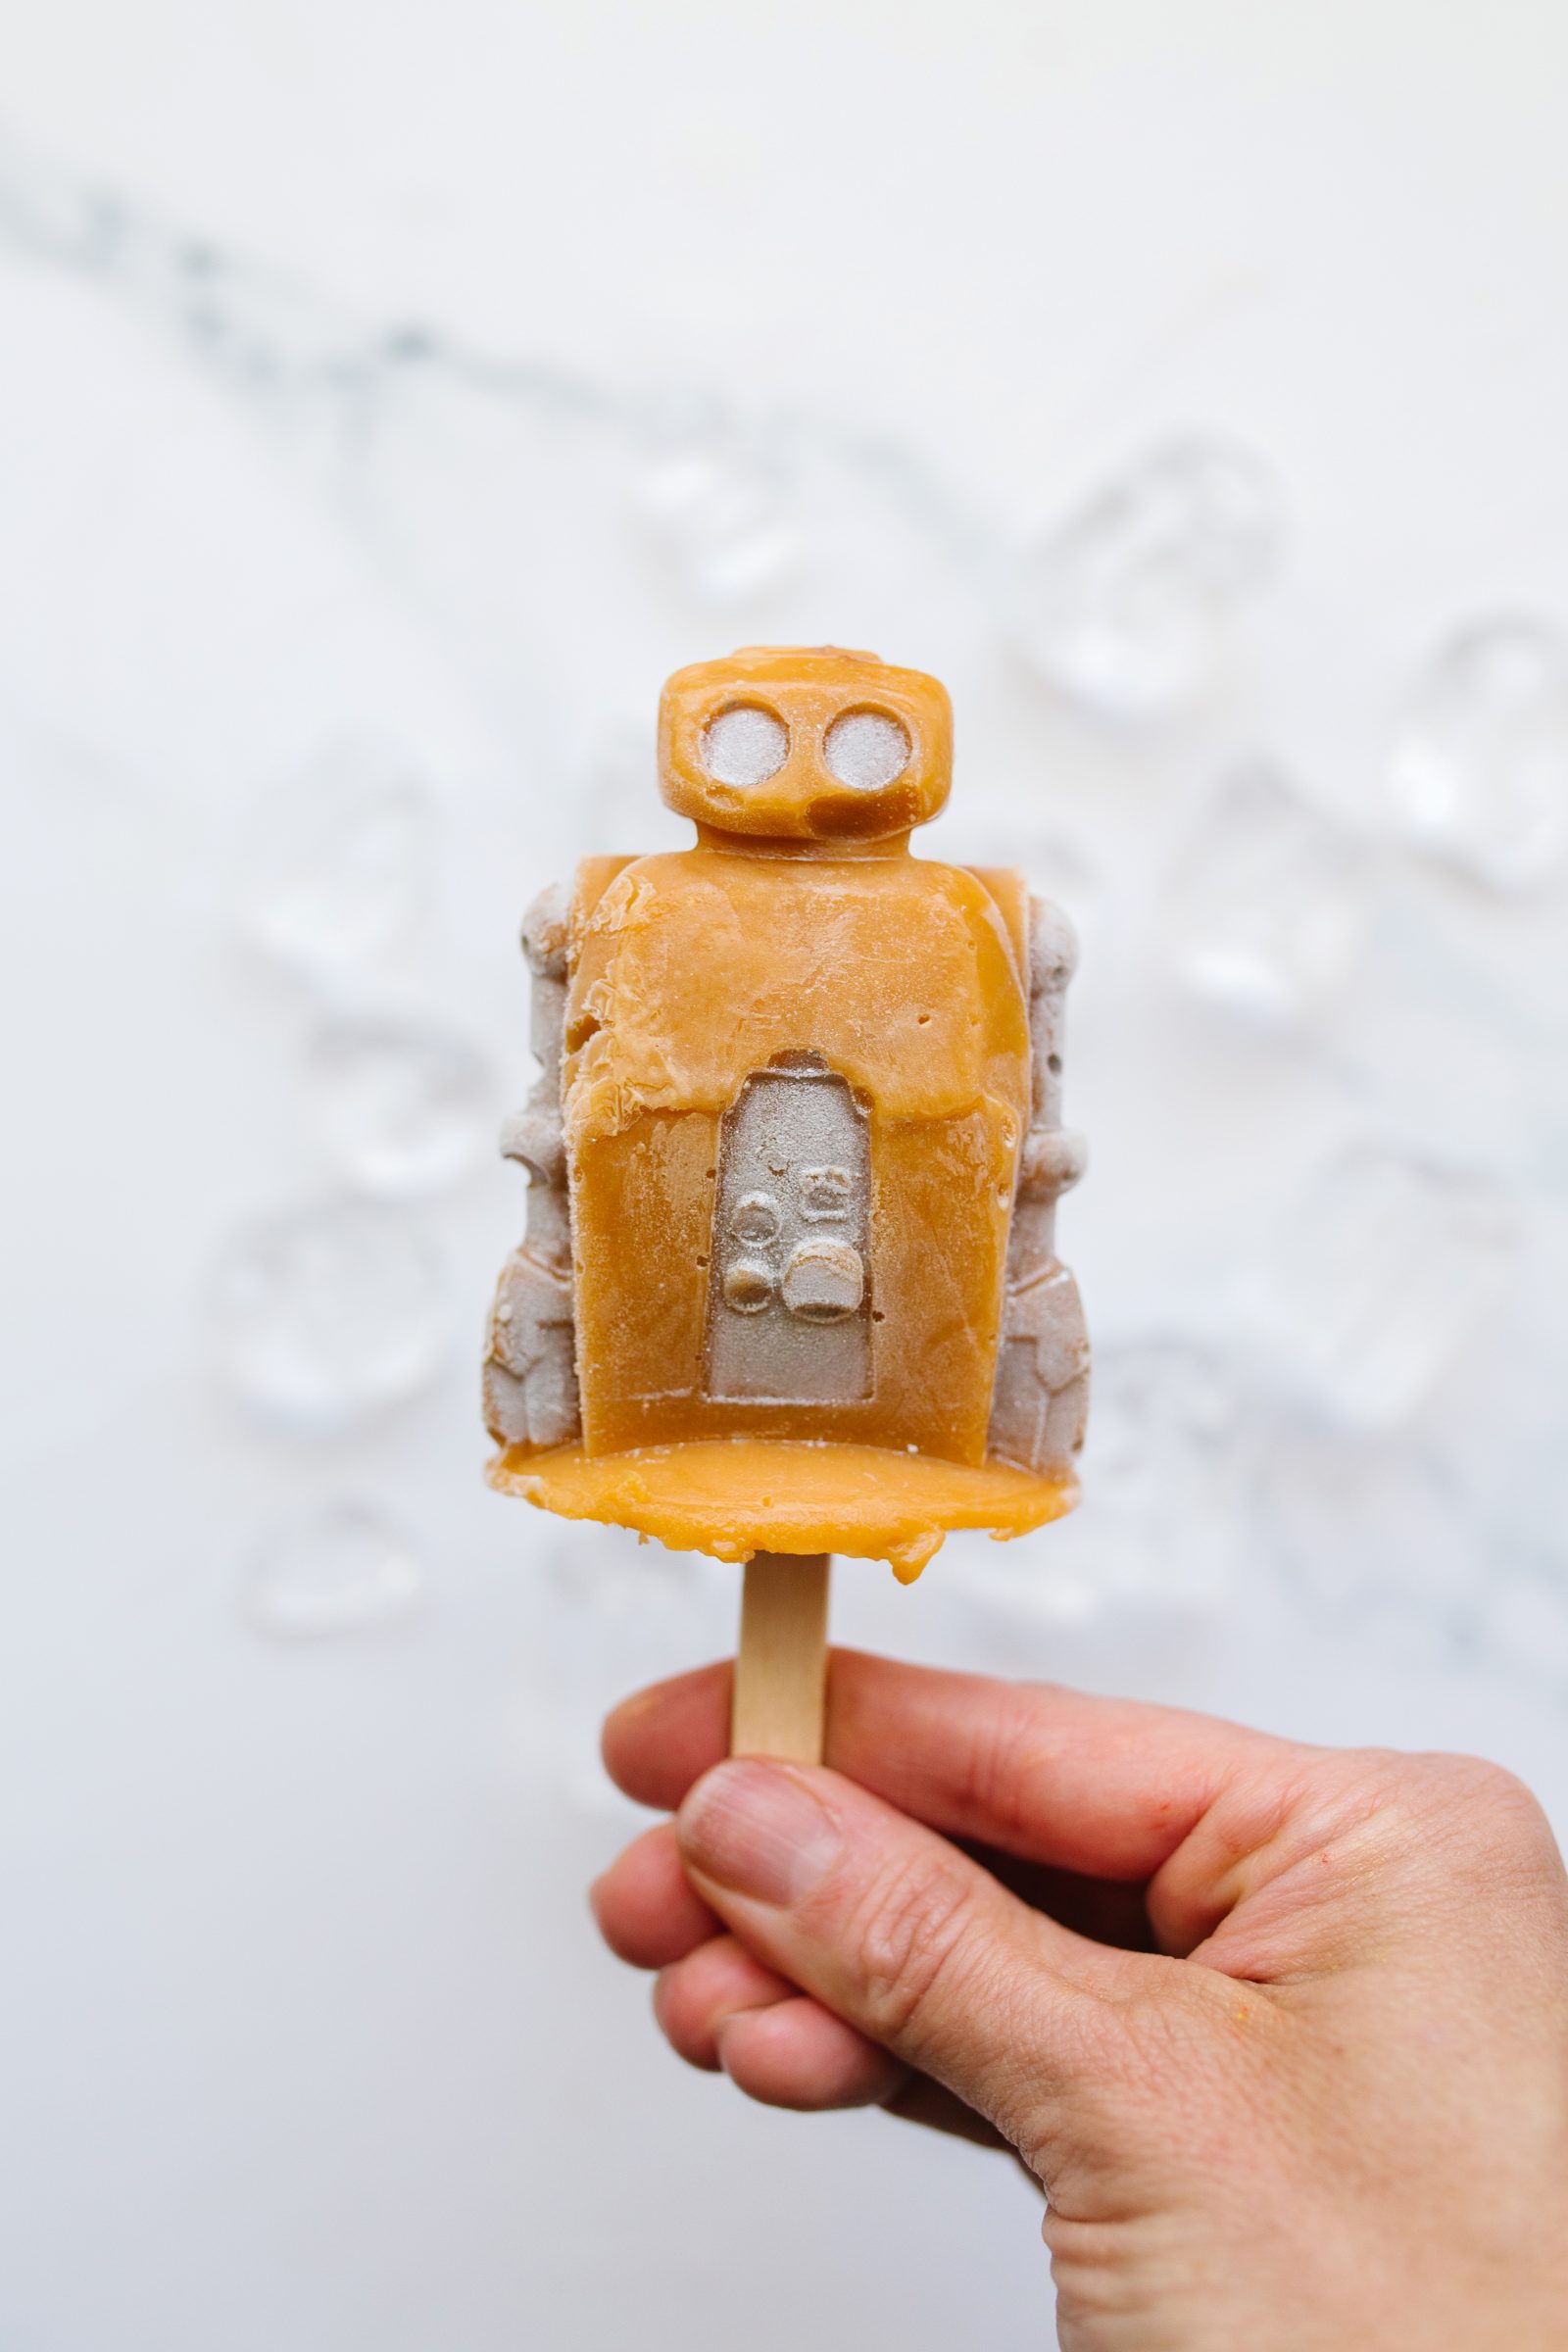 Summer Snacks: Metallic-Dusted Robot Pudding Pops Recipe + a tutorial featured by Top US Craft Blog + The Pretty Life Girls